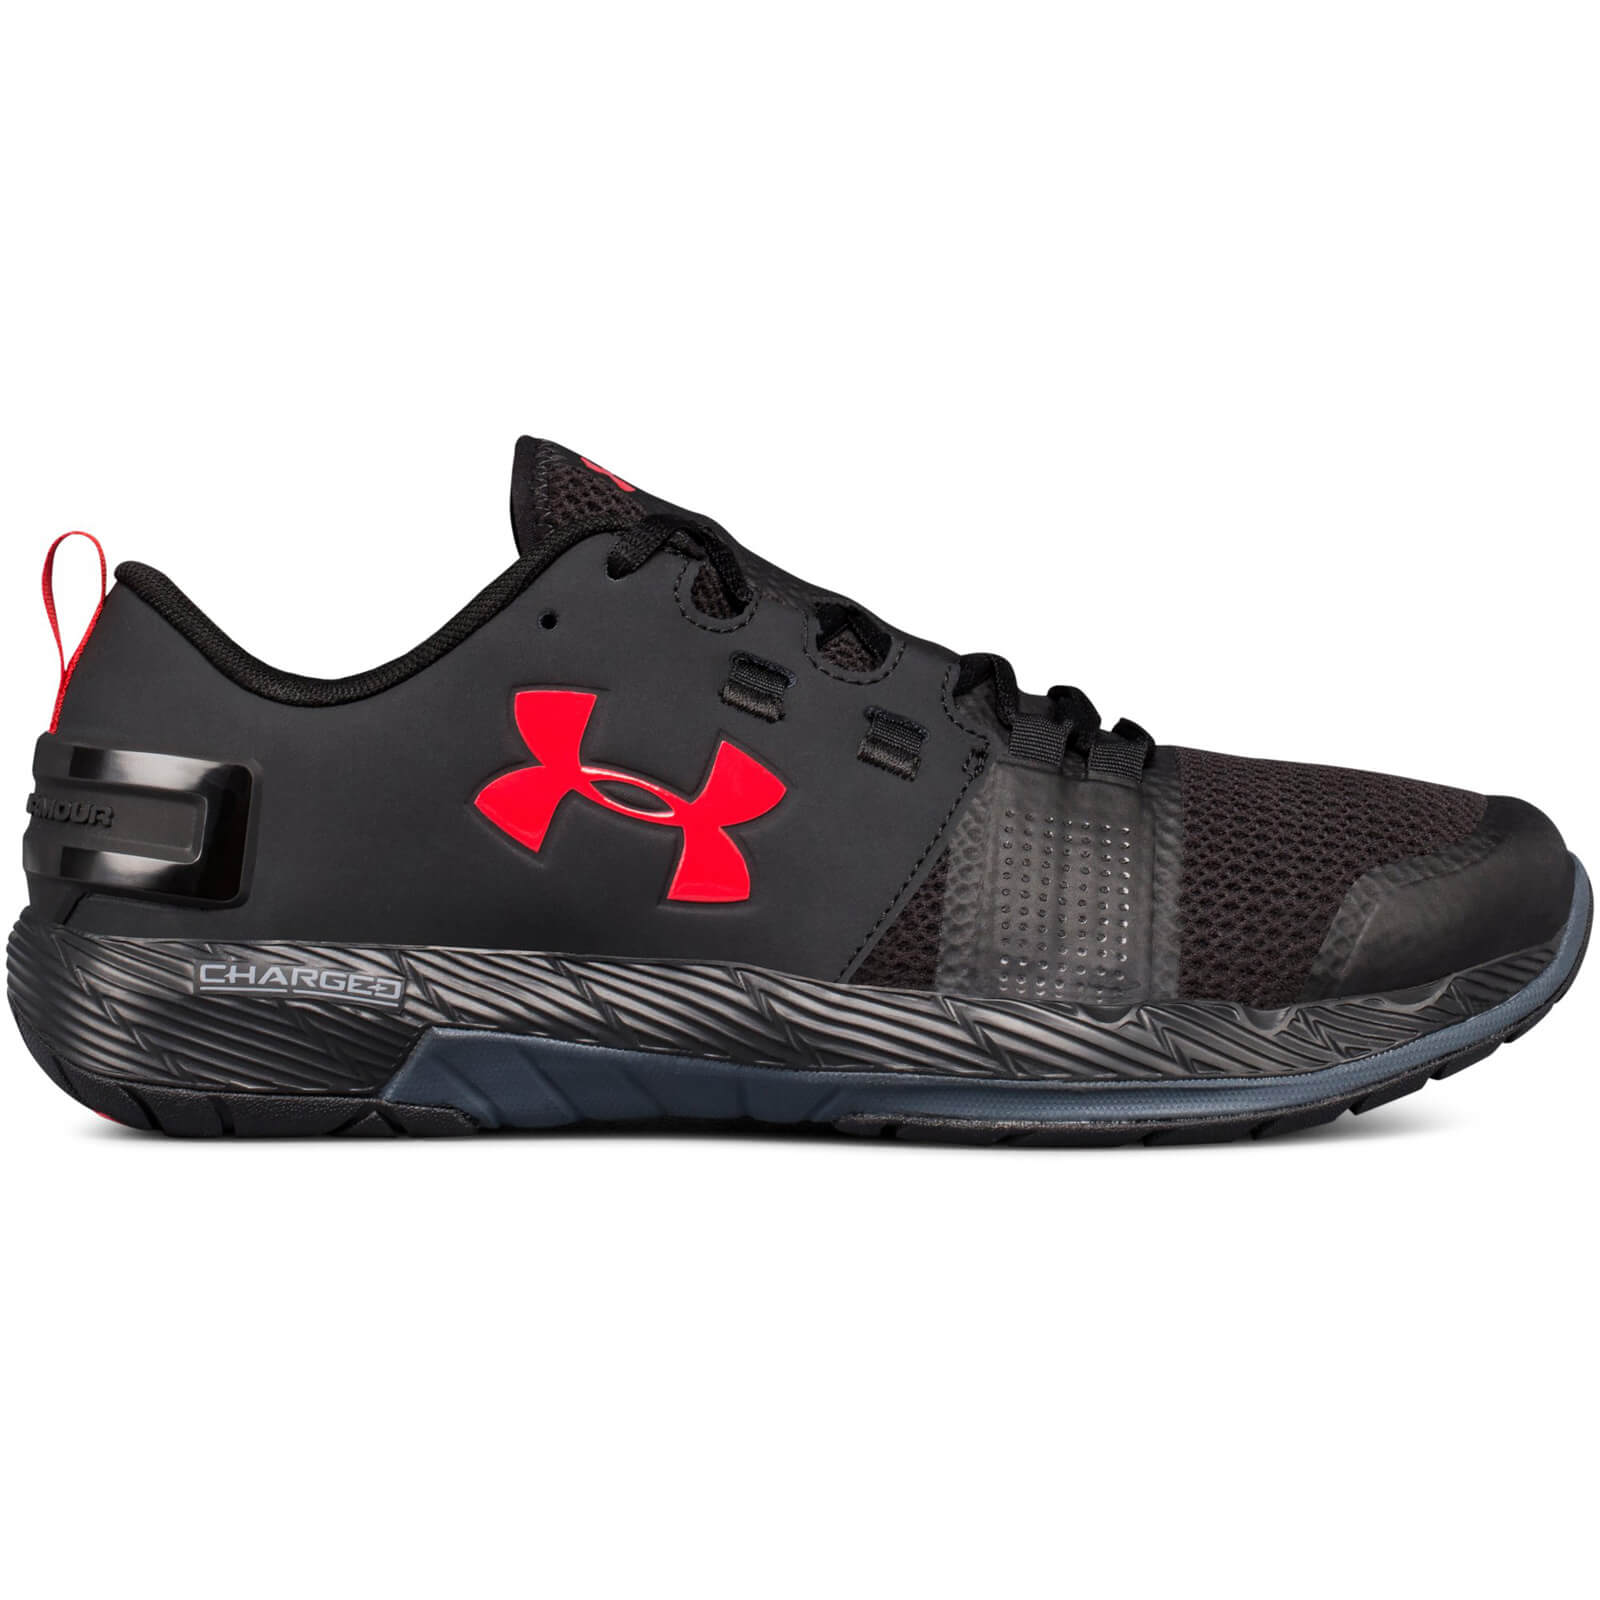 Commit Training Shoes - Black/Red 